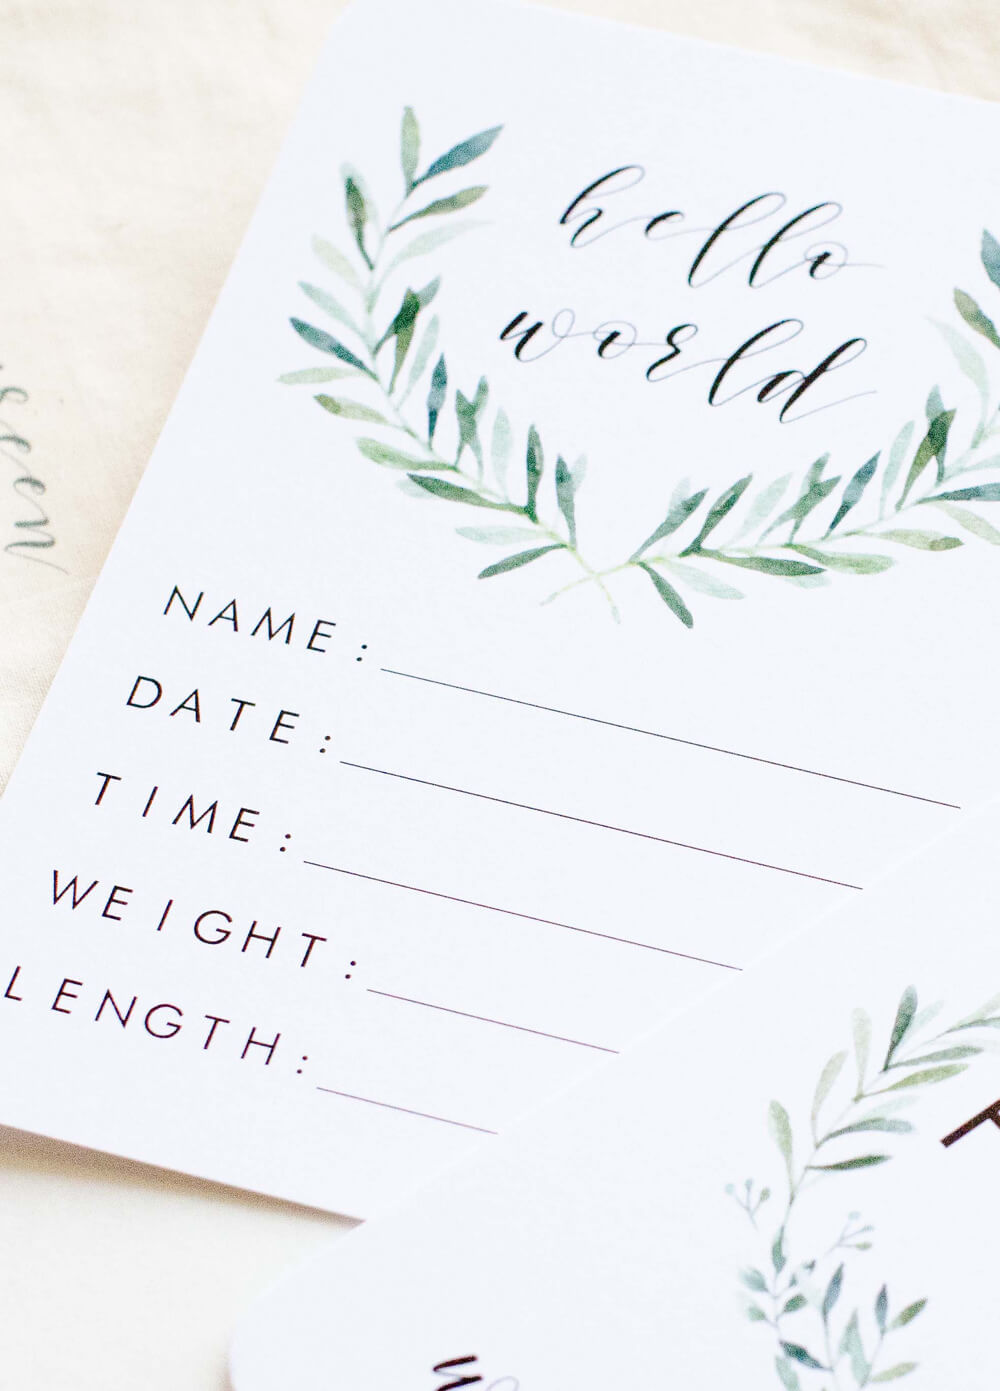 Unisex Baby Milestone Cards in Evergreen Design by Blossom & Pear